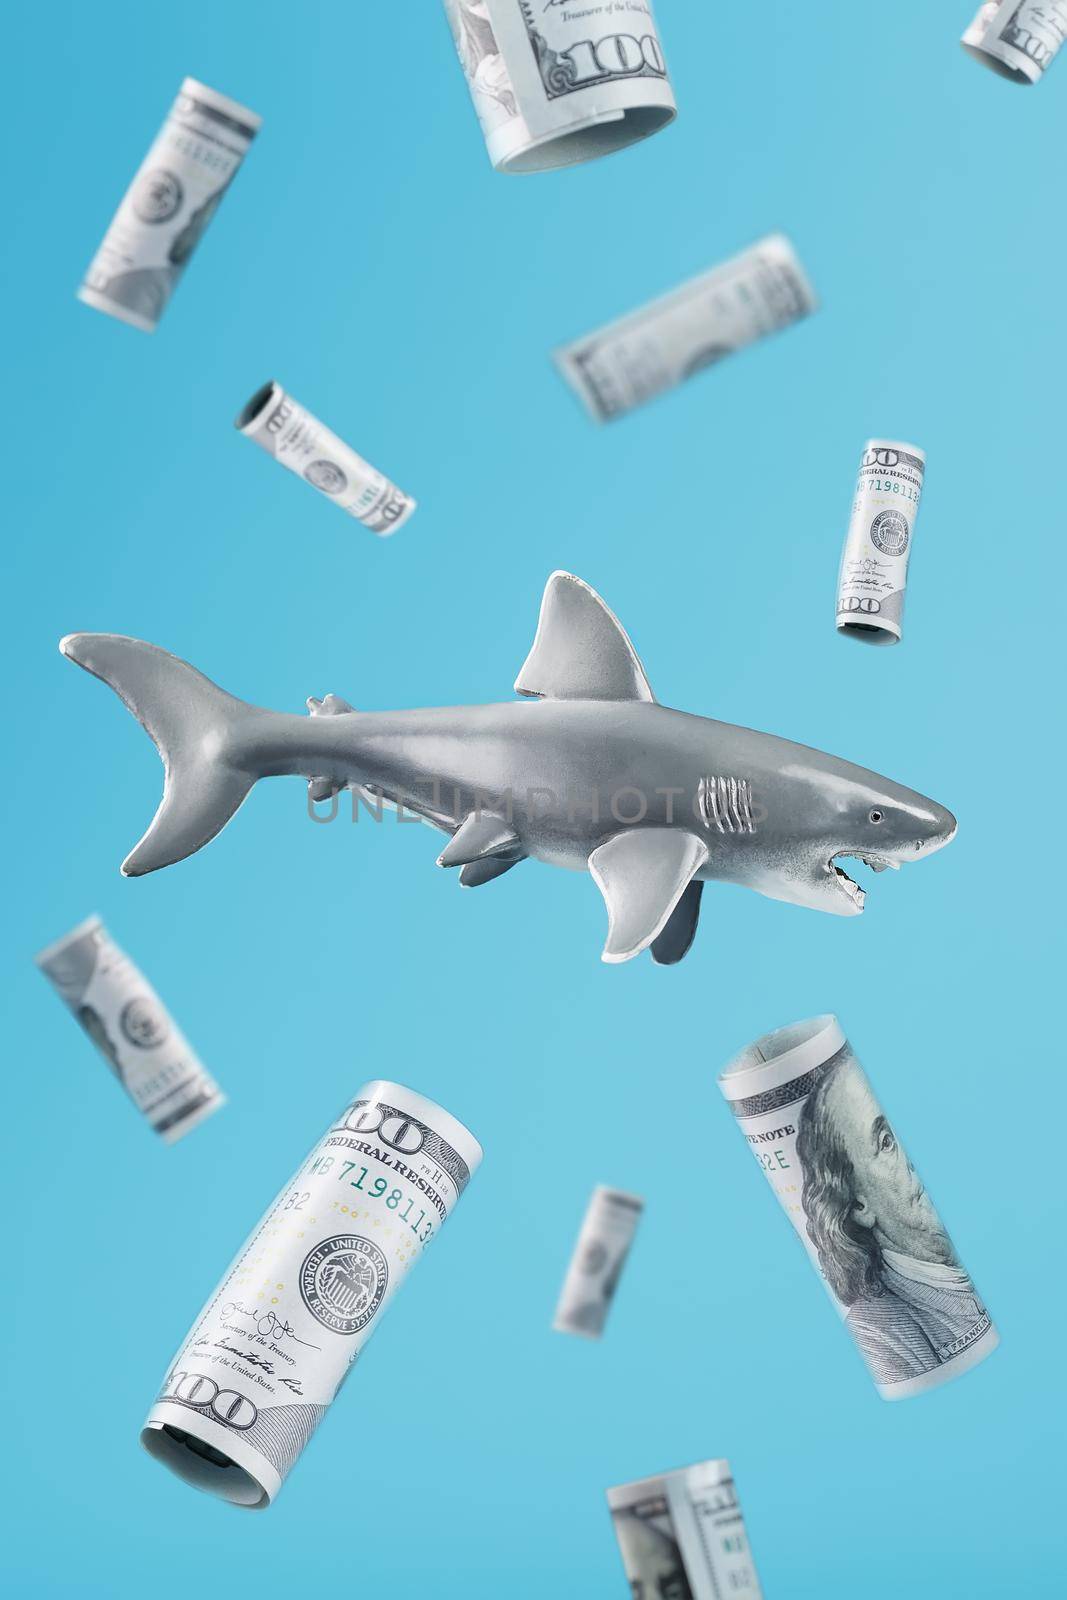 A shark in the center surrounded by 100 dollar bills on a blue background. Conceptual metaphorical image of dangerous predators in business and investing